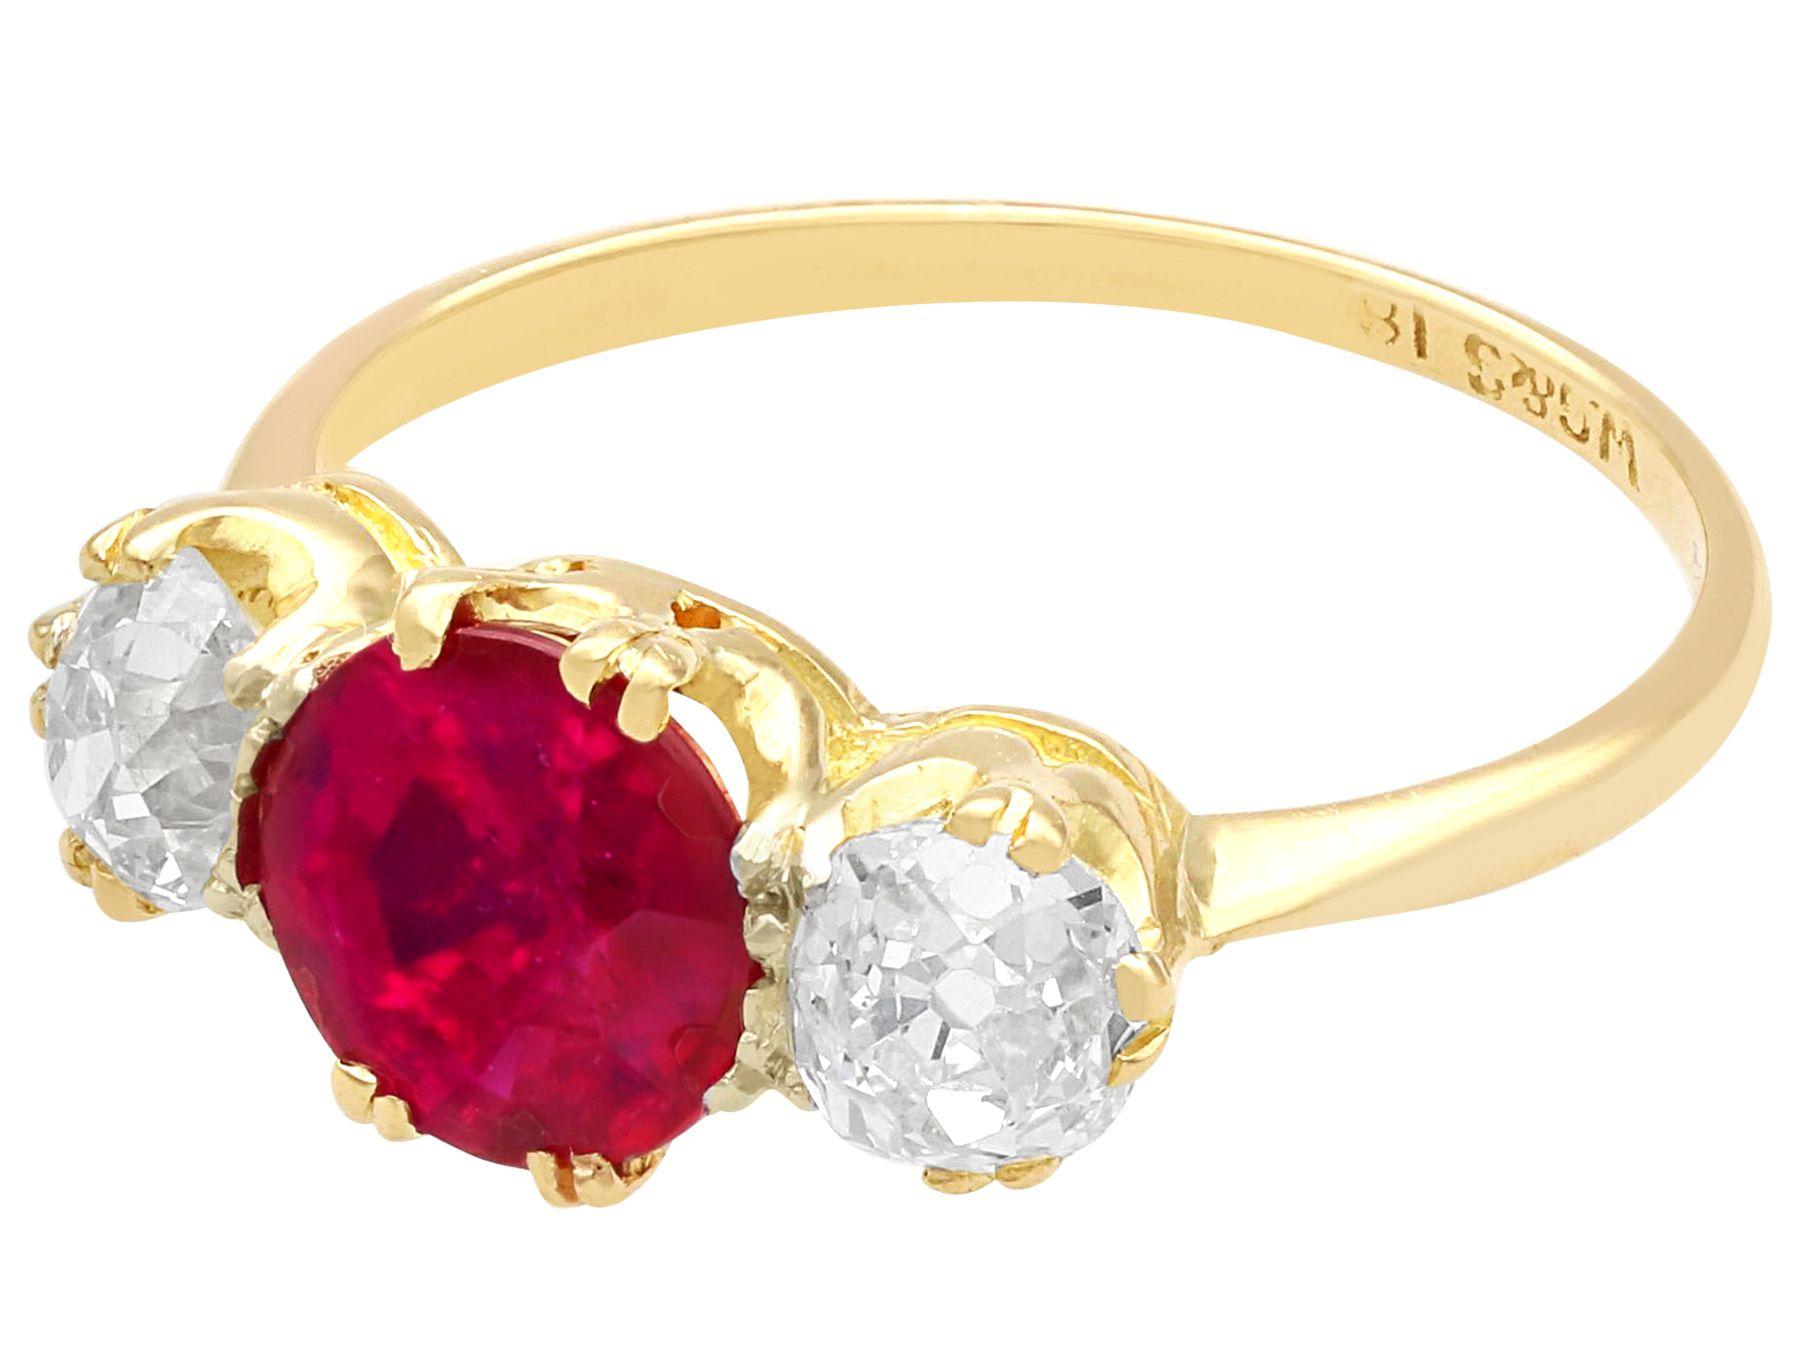 Old European Cut Antique 1.65 Carat Ruby and 1.07 Carat Diamond Yellow Gold Trilogy Ring For Sale